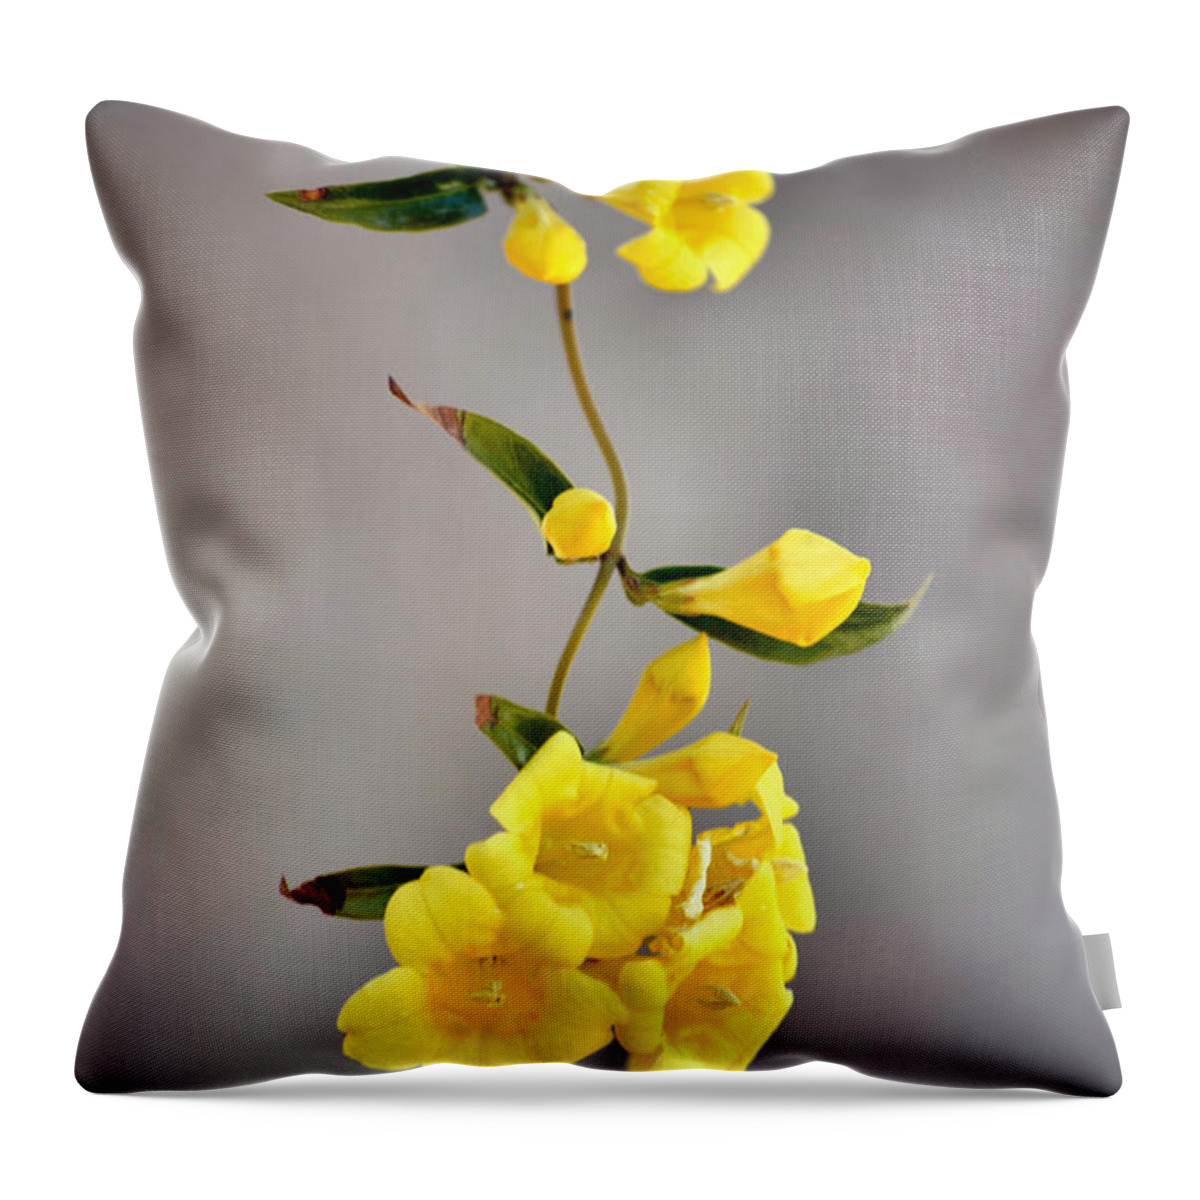 Yellow Flowers Throw Pillow featuring the photograph Hanging Blossoms by Deb Halloran